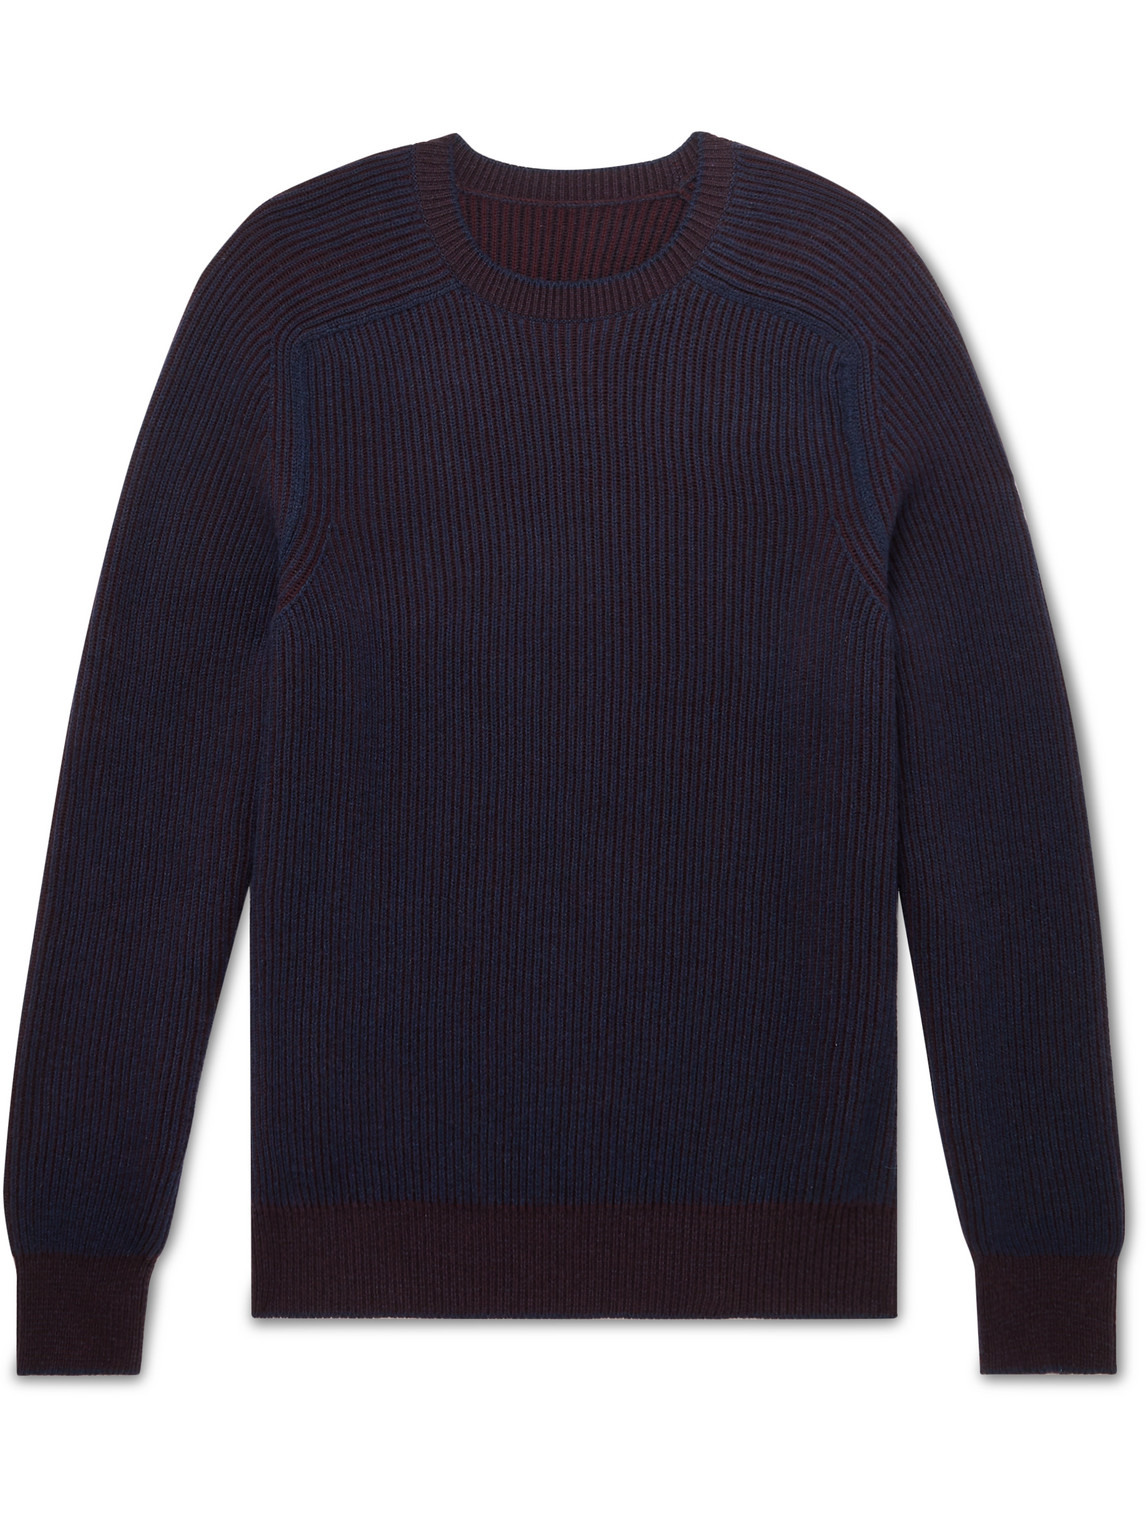 SEASE REVERSIBLE RIBBED CASHMERE SWEATER